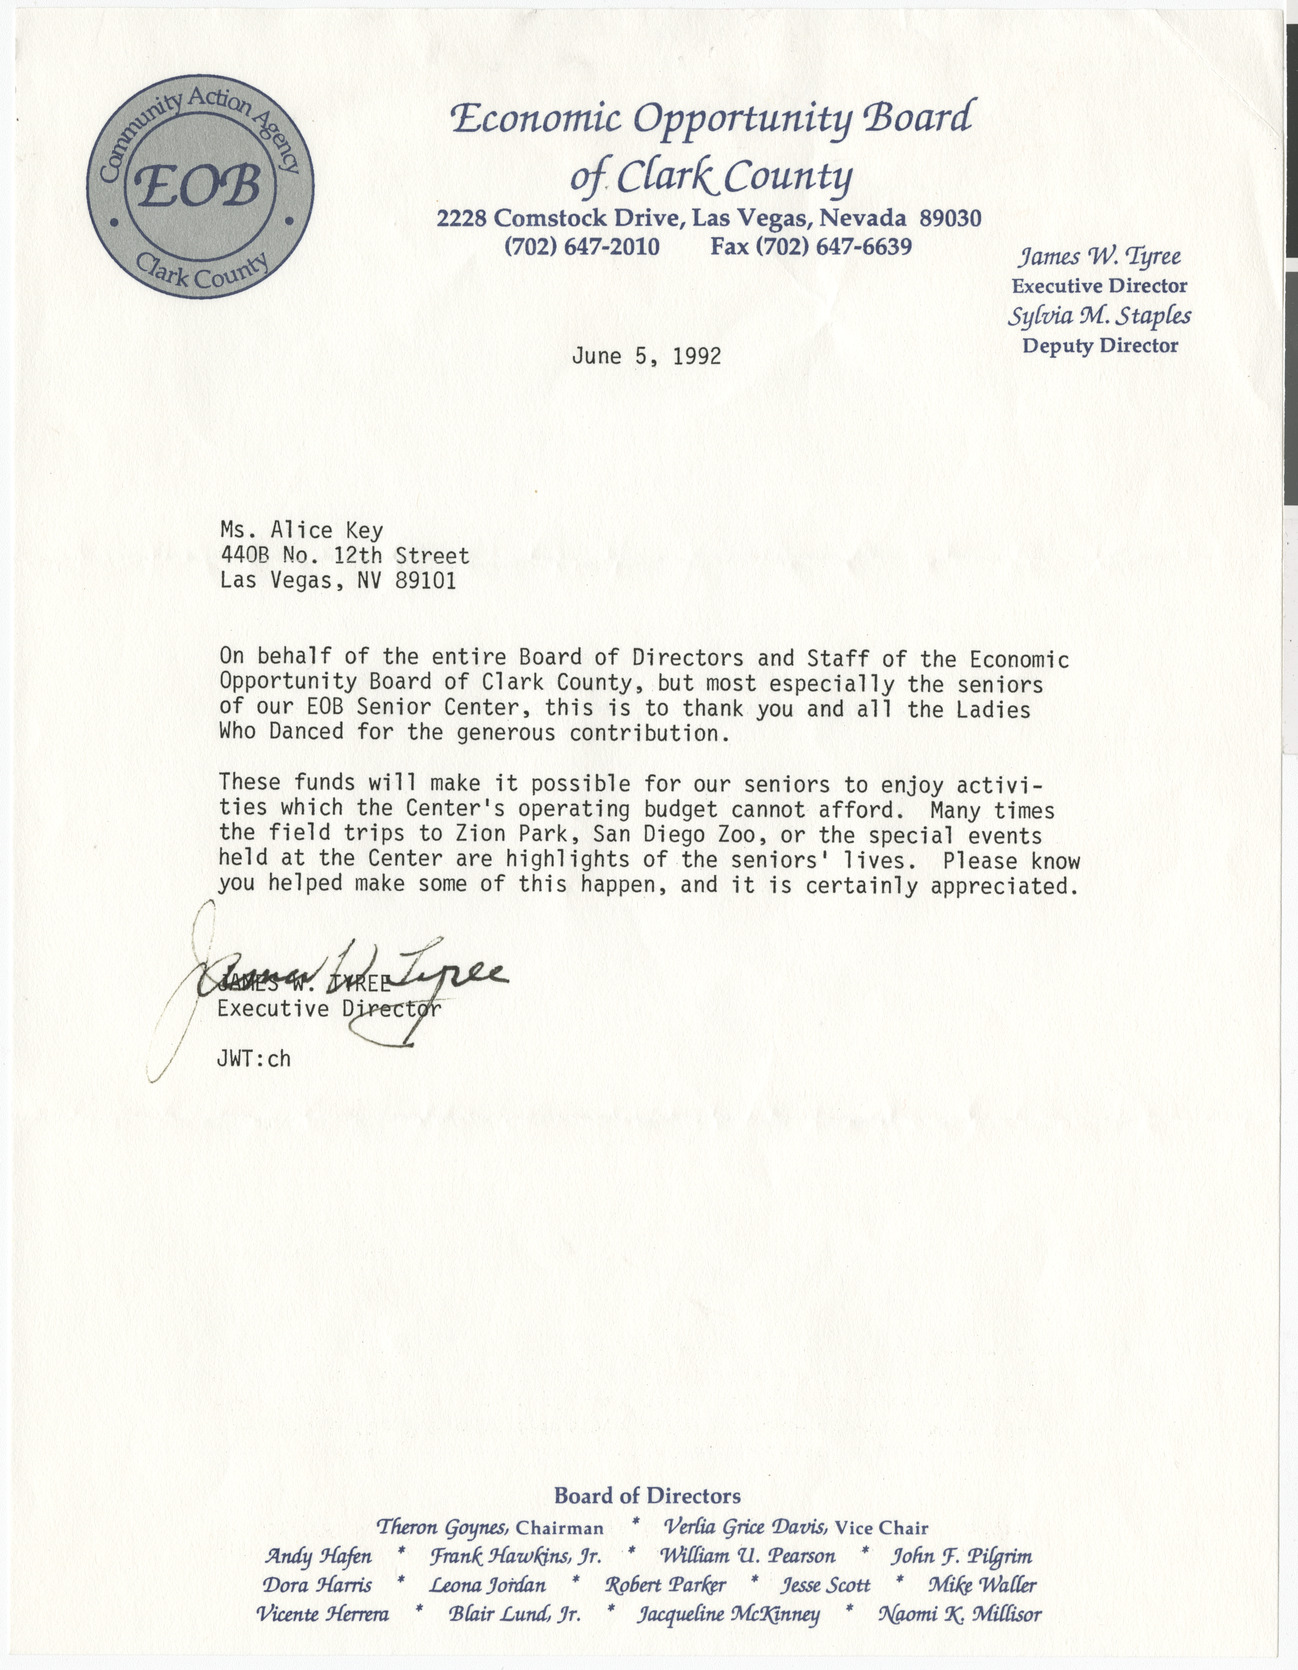 Letter from James Tyree, Economic Opportunity Board, to Alice Key, June 5, 1992